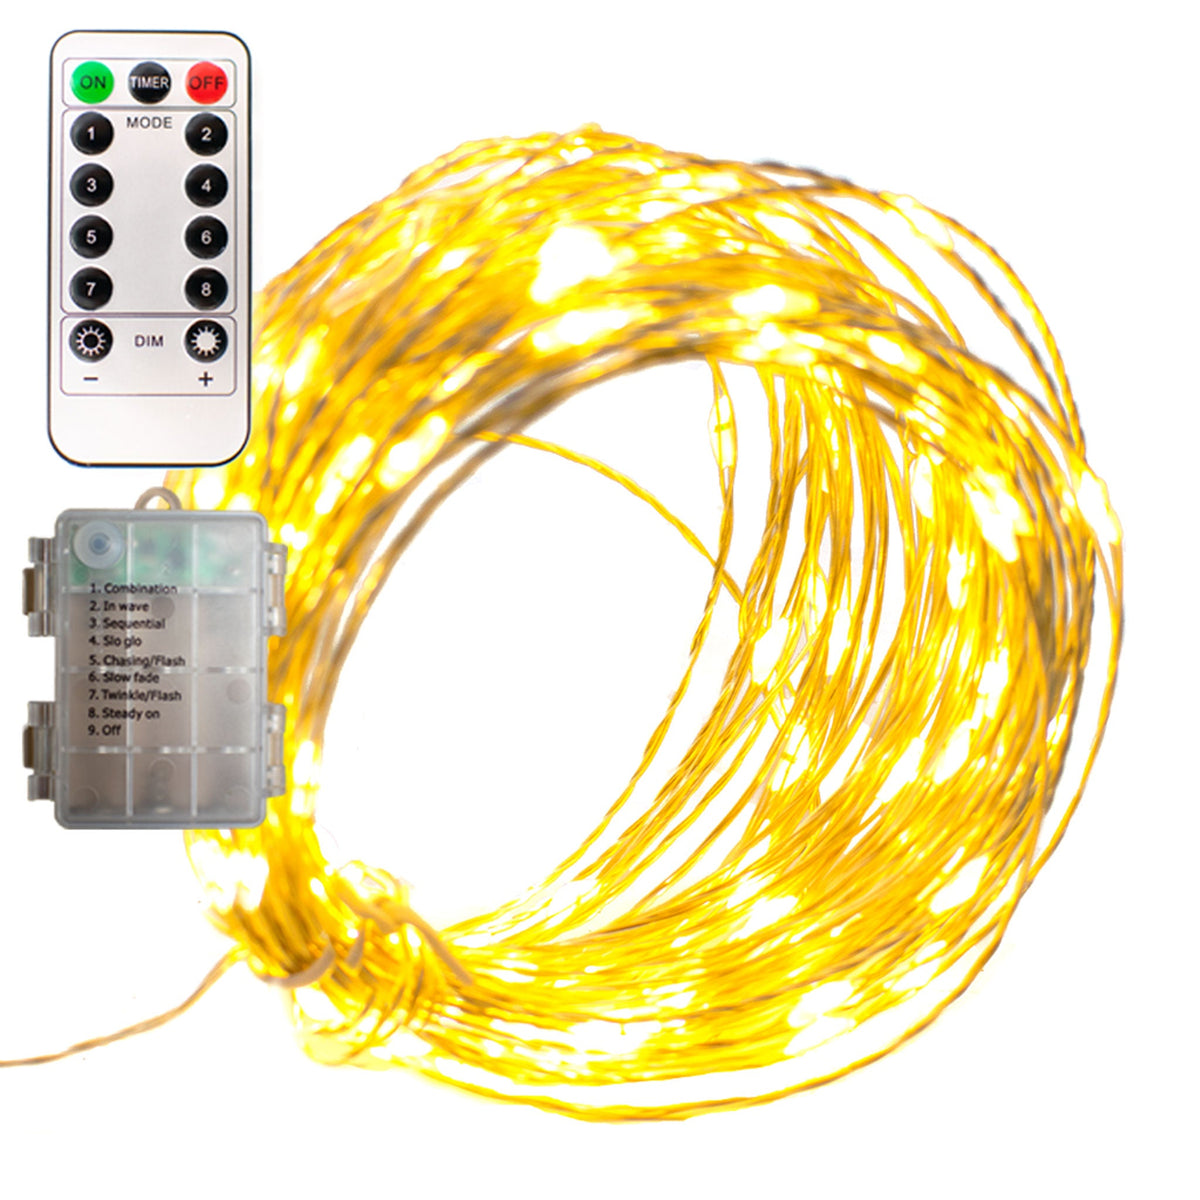 Lee Display LED Fairy String Lights Remote Control Battery Operated 120L - 40ft / Battery Operated